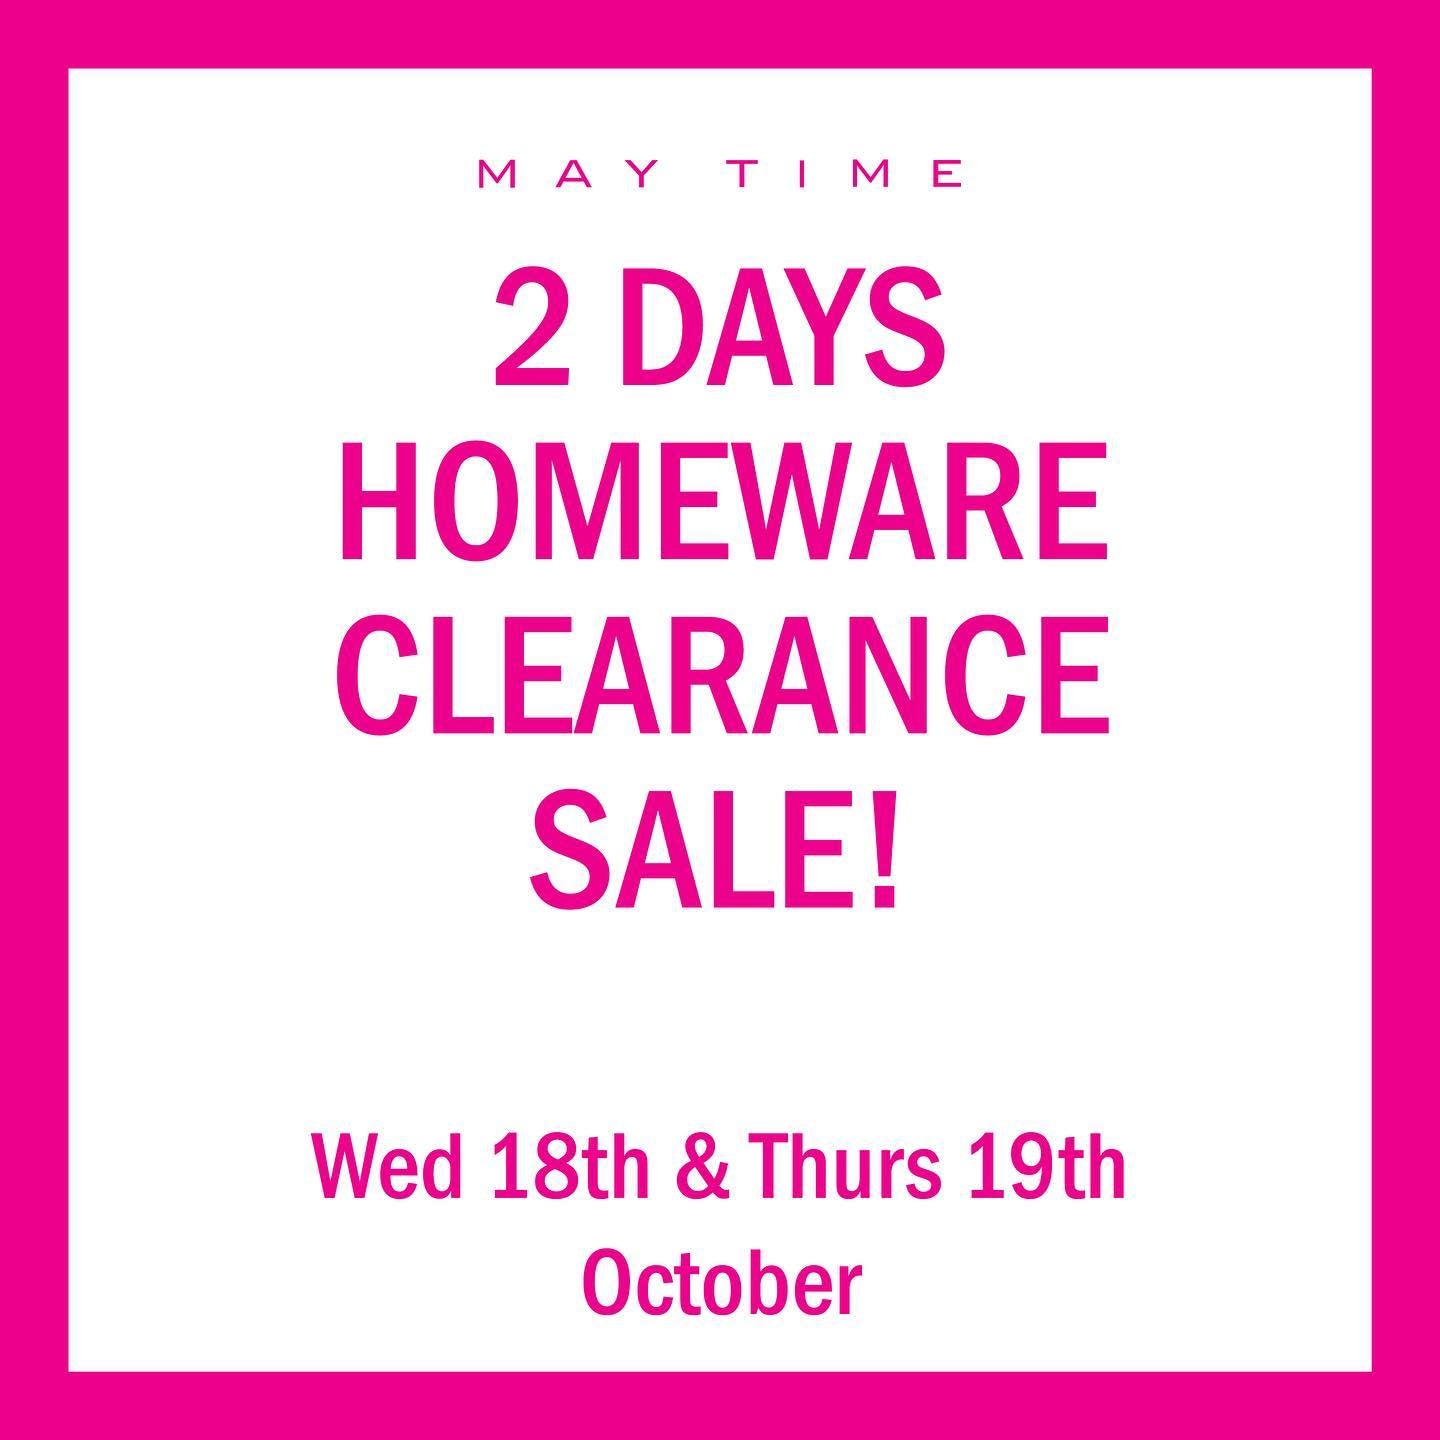 CRAZY CLEARANCE SALE!  Wednesday & Thursday, 18th & 19th October 9am to 4pm at 10E Burrett Ave, Penrose (off Walls Rd).

Discover incredible deals on everything homeware from candles to cushions, kitchenware, wall art and vases to lighting and furniture.

These are samples, last ones, and end-of-line items – all priced to go!

Please note: Eftpos only, no cash, no holds, exchanges or returns.

Don't miss out on getting some bargains for home or gifts. Open to the public!
.
.
#homeware #sale #clearance #2daysale #furniture #lighting #gifts